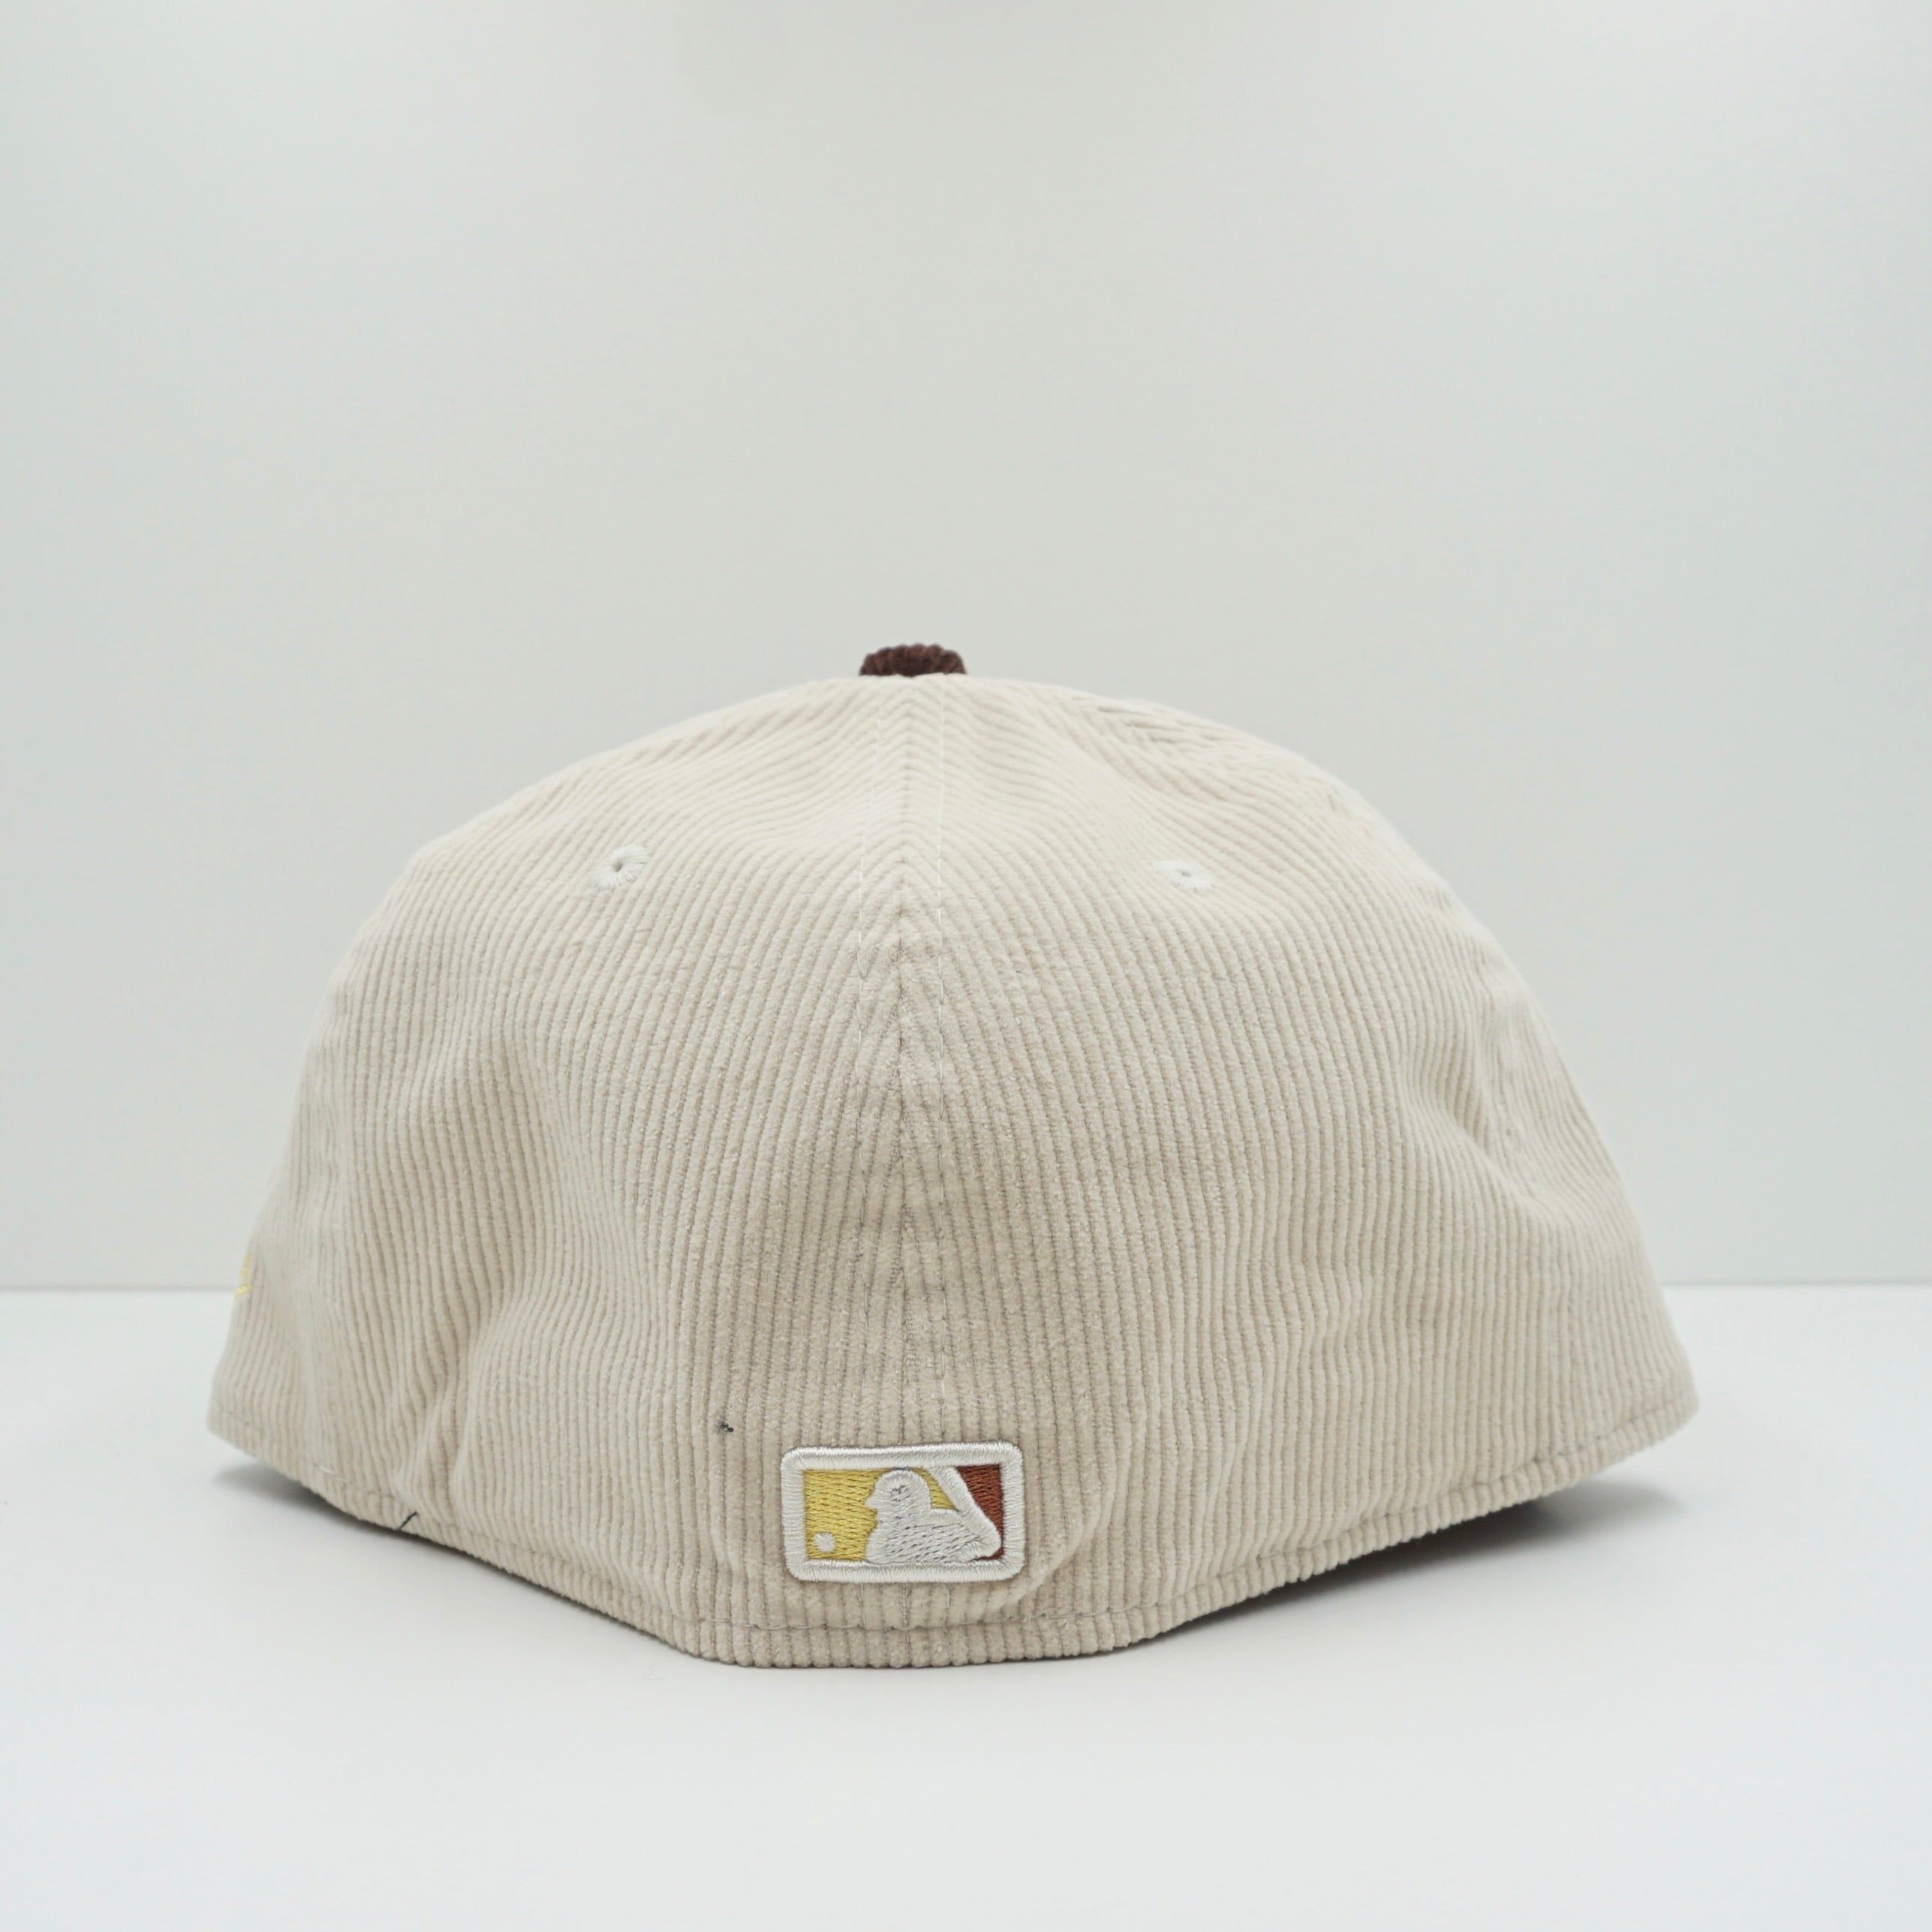 New Era Corduroy Los Angeles Dodgers Fitted Cap